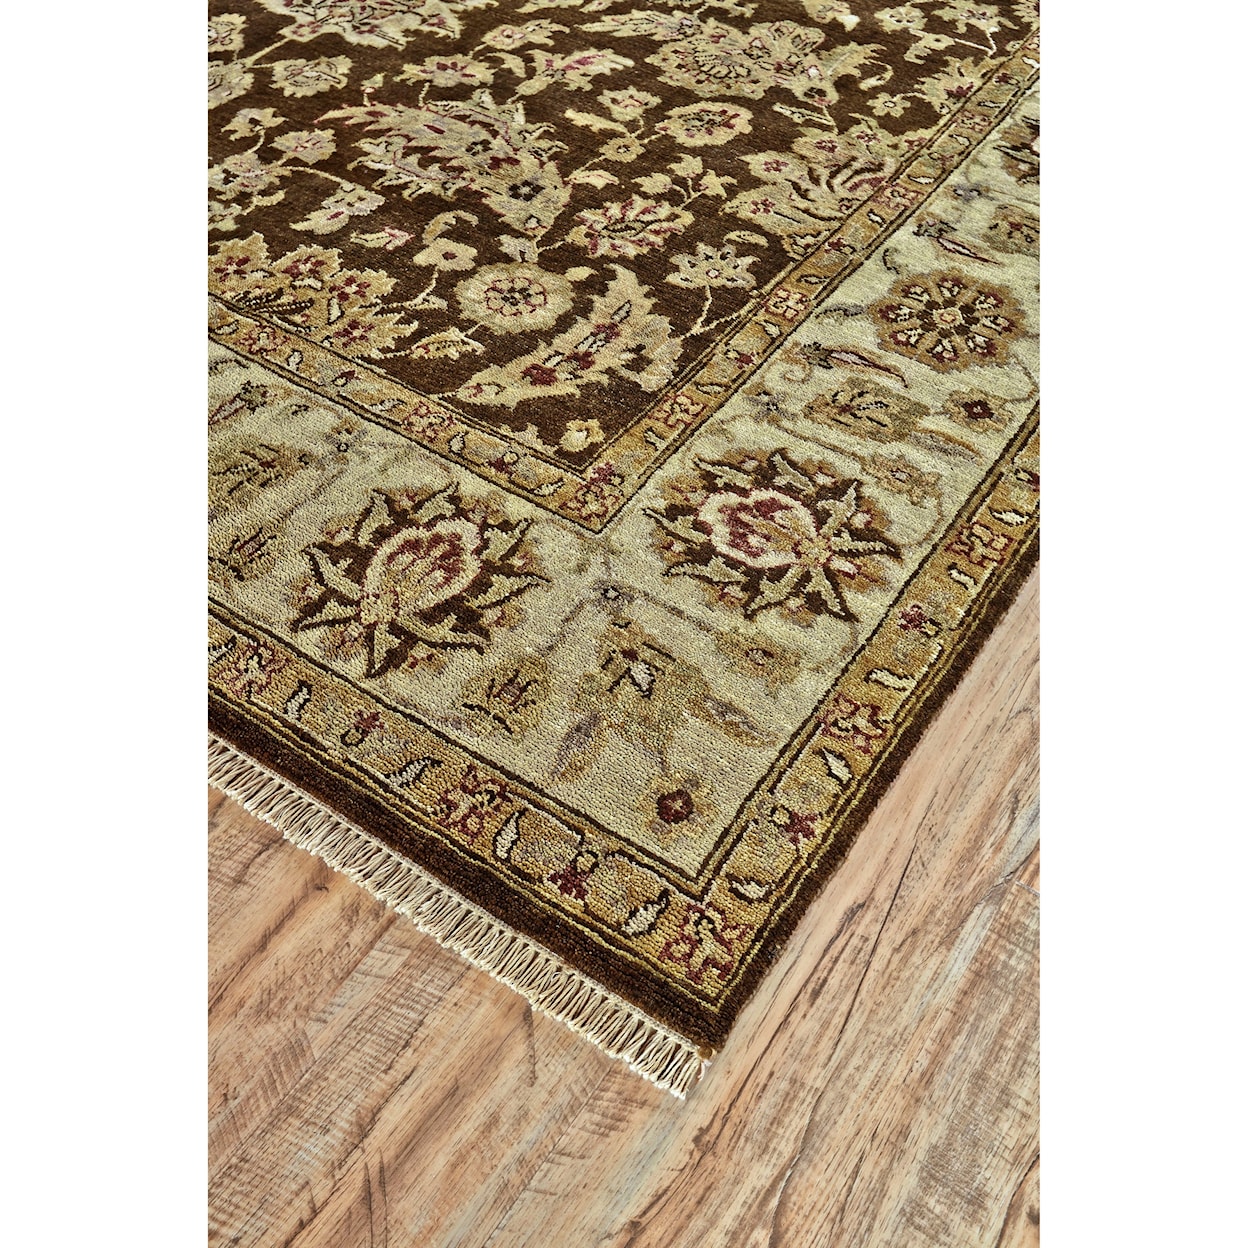 Feizy Rugs Drake Brown/Beige 5'-6" x 8'-6" Area Rug